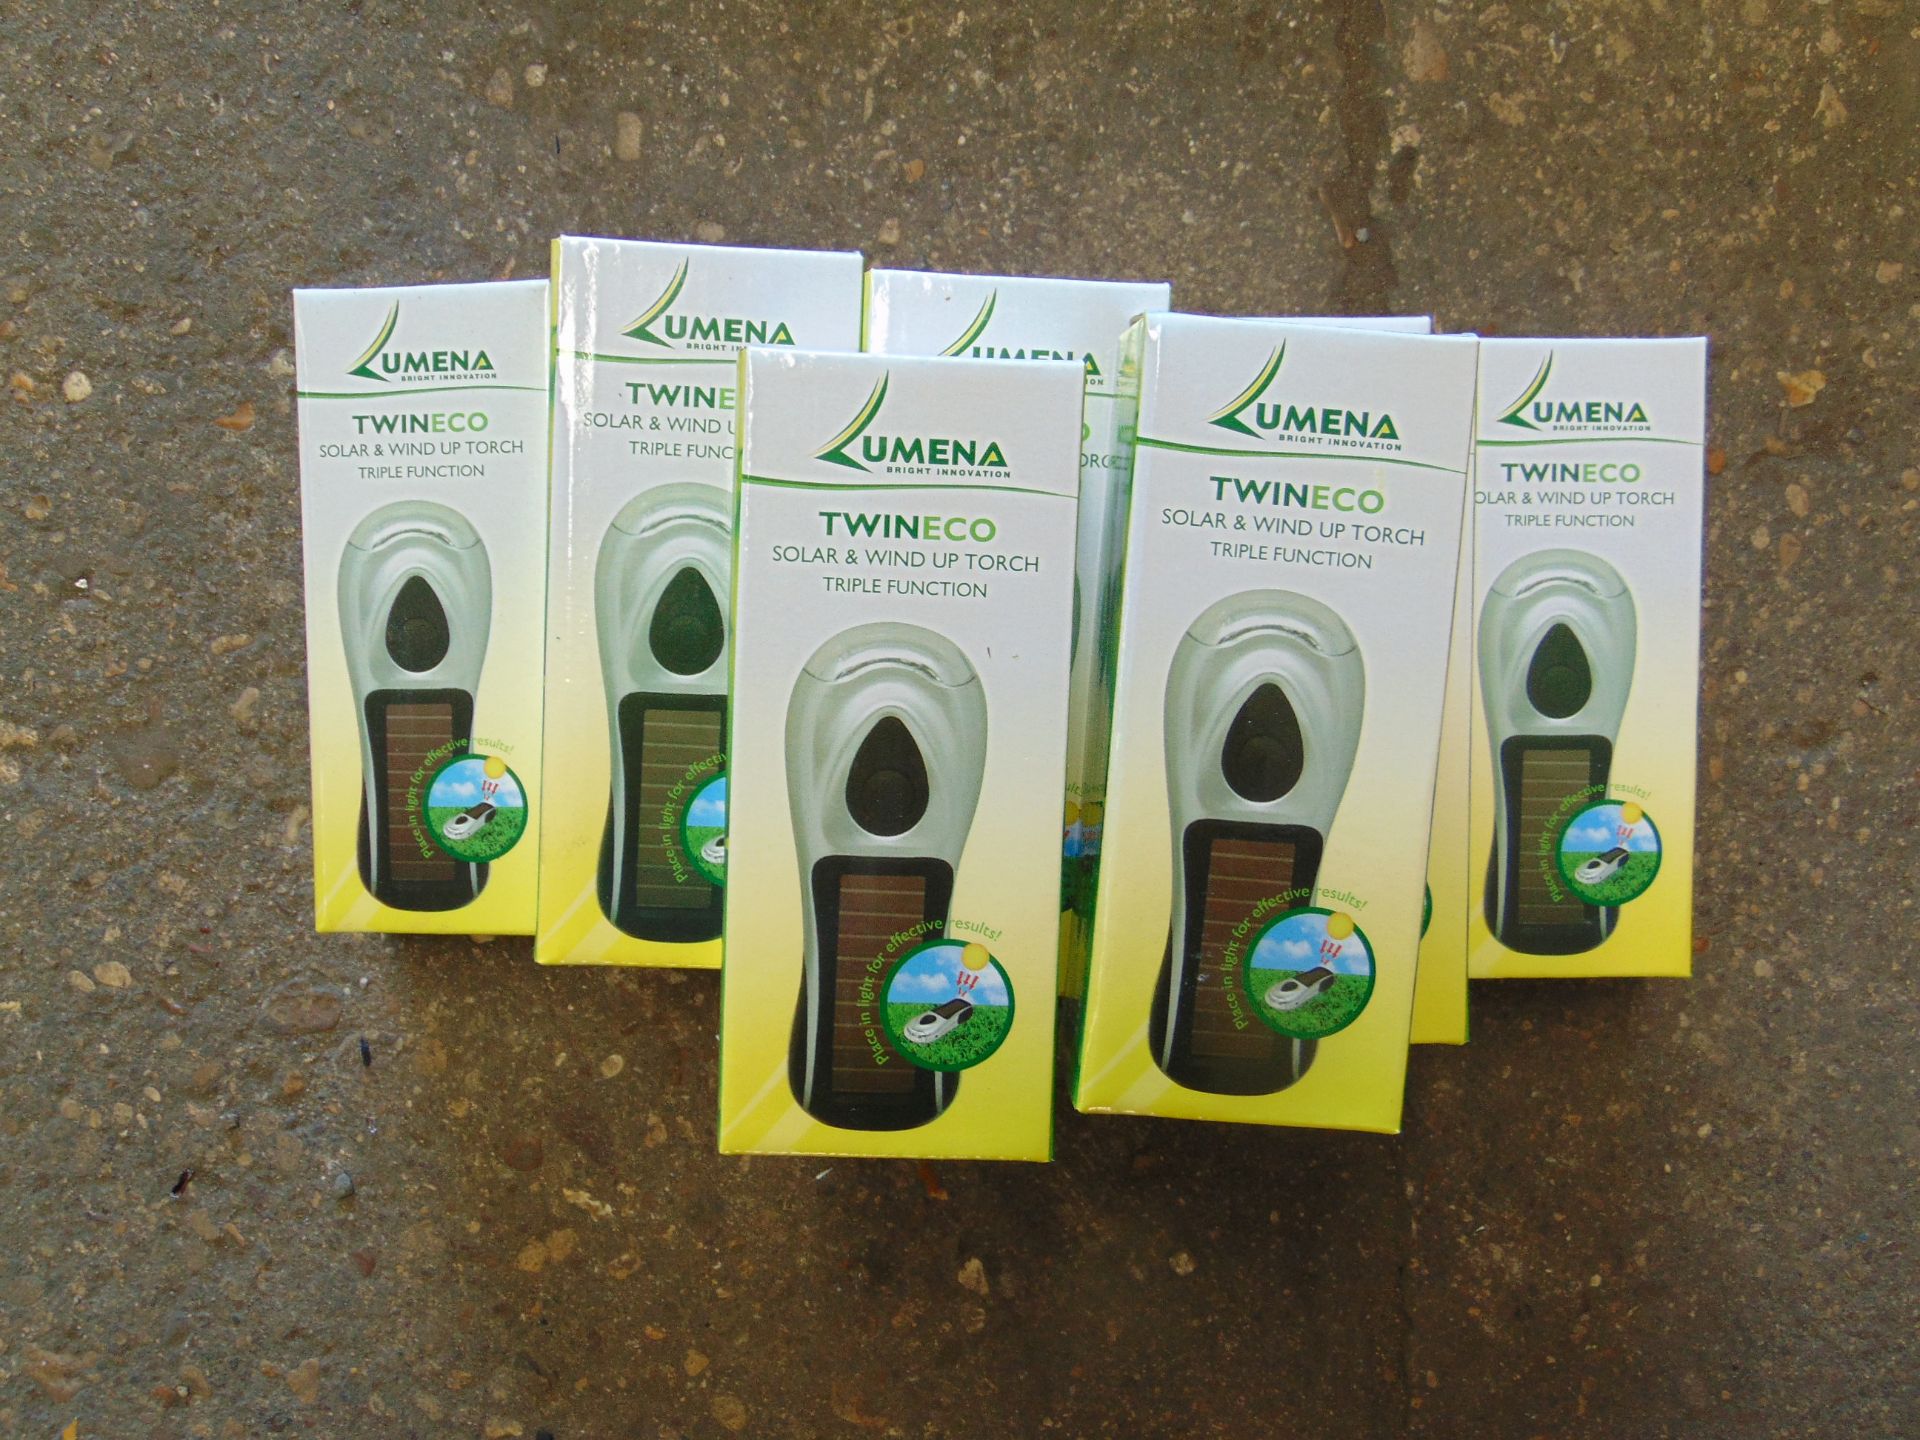 10X LUMENA TWINECO SOLAR AND WIND UP TRIPLE FUNCTION TORCH UNISSUED - Image 2 of 5